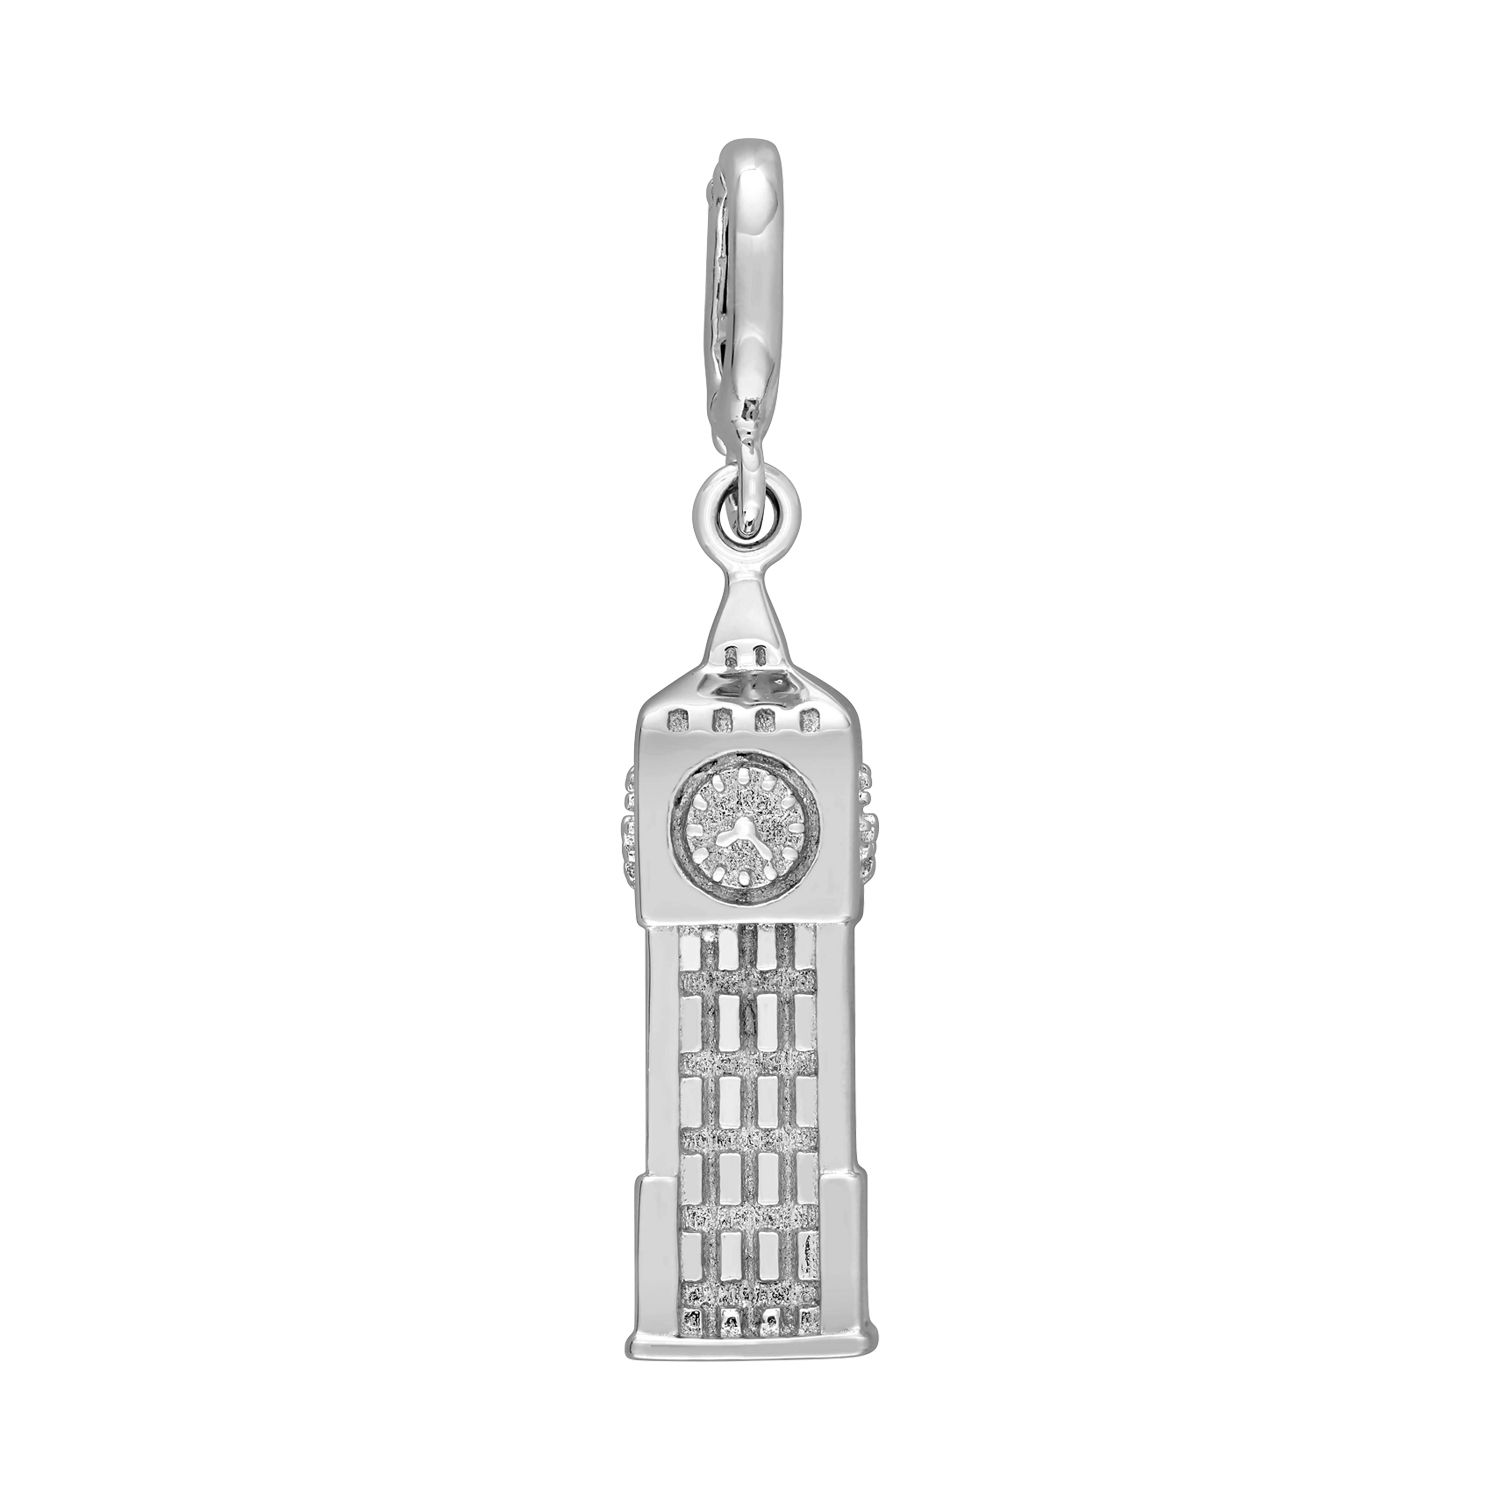 Image for Laura Ashley Lifestyles Great Britain Collection Sterling Silver Big Ben Clock Tower Charm at Kohl's.